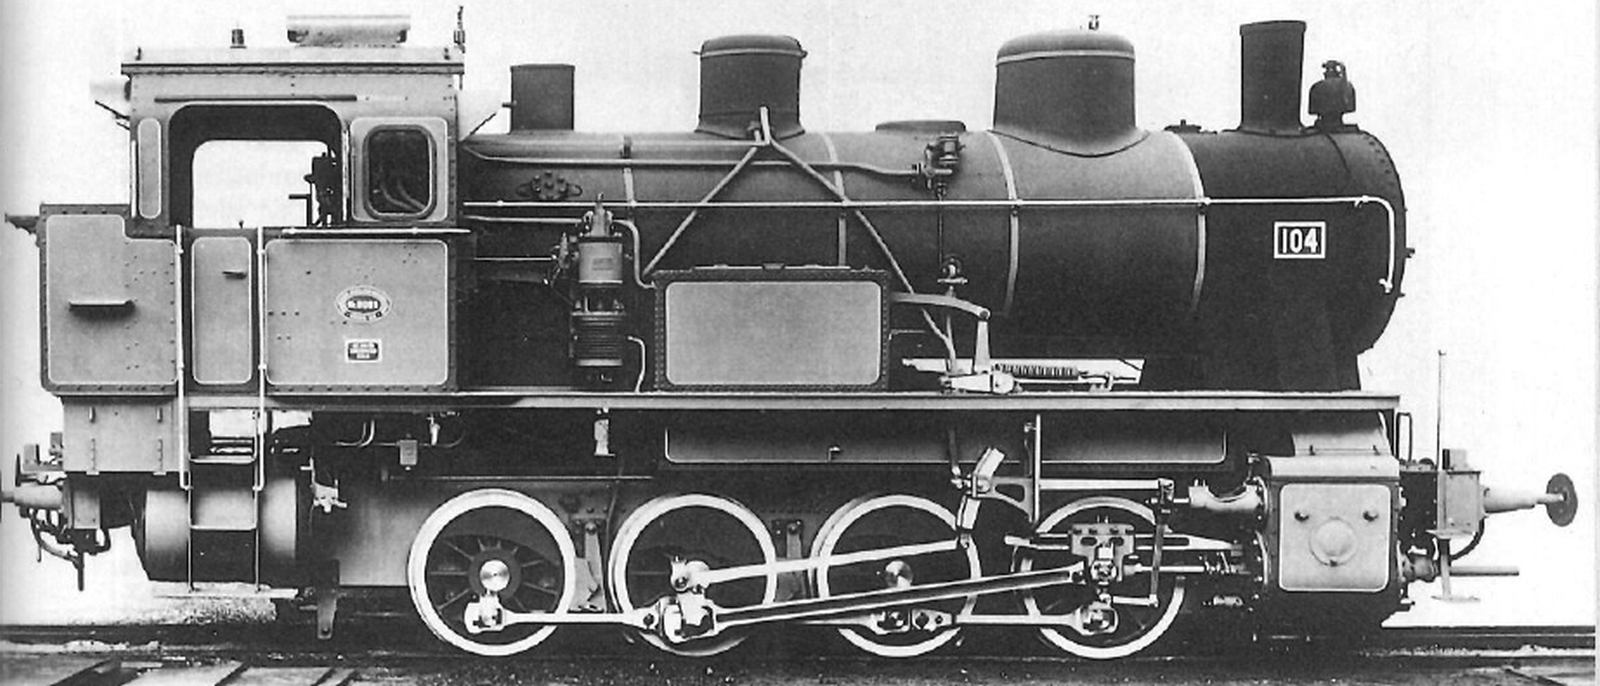 No. 104 of the Halle-Hettstedt railway on a Krauss factory photo